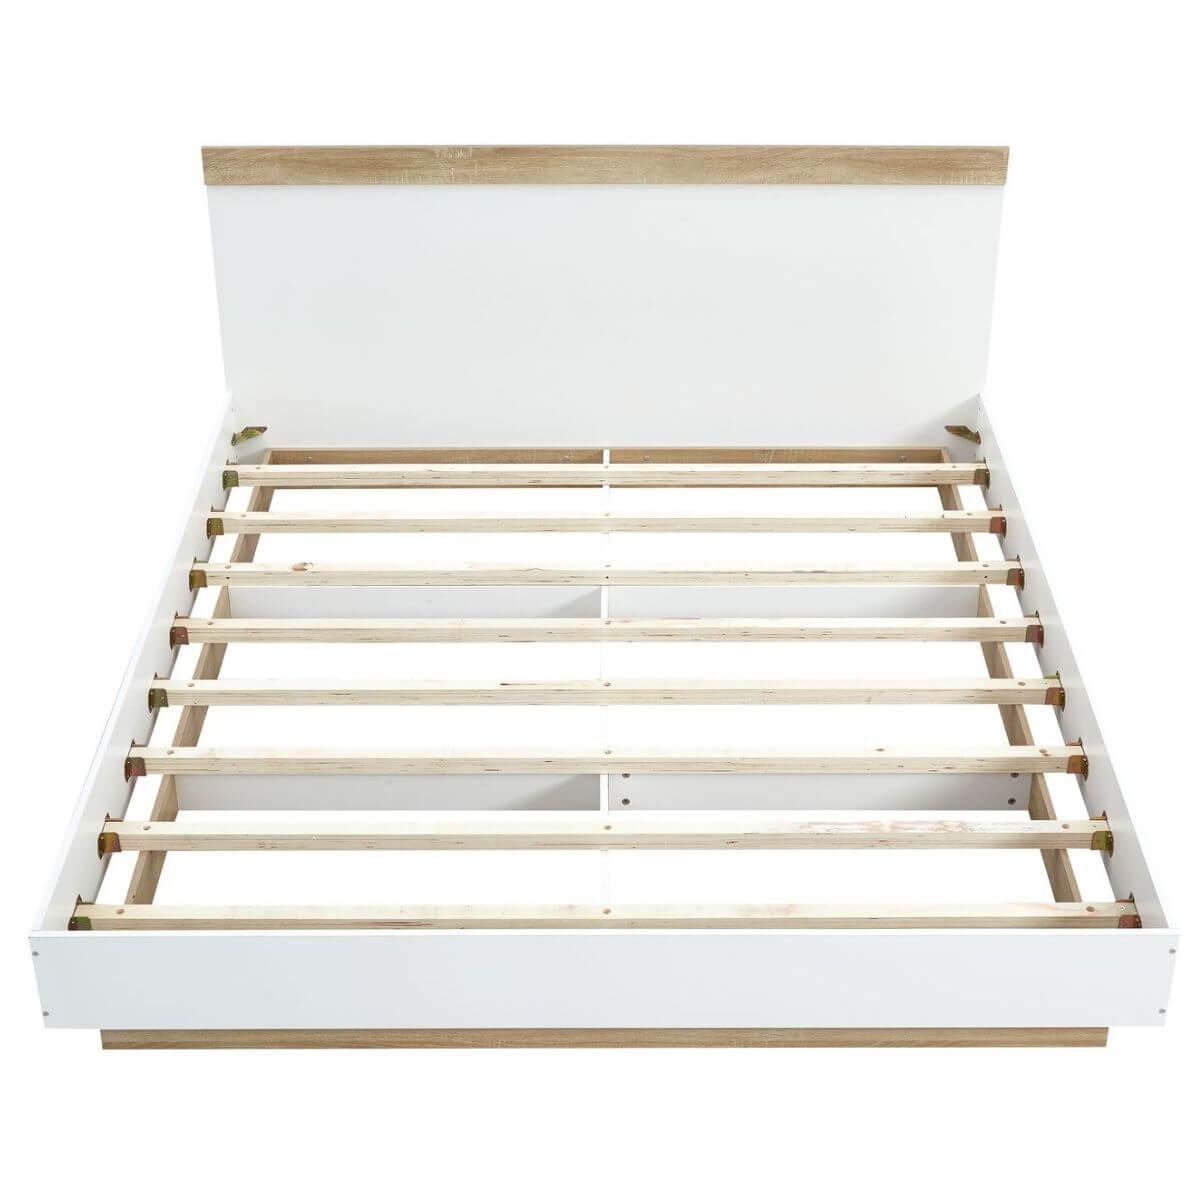 Aiden Industrial Contemporary White Oak Bed Frame Queen Size